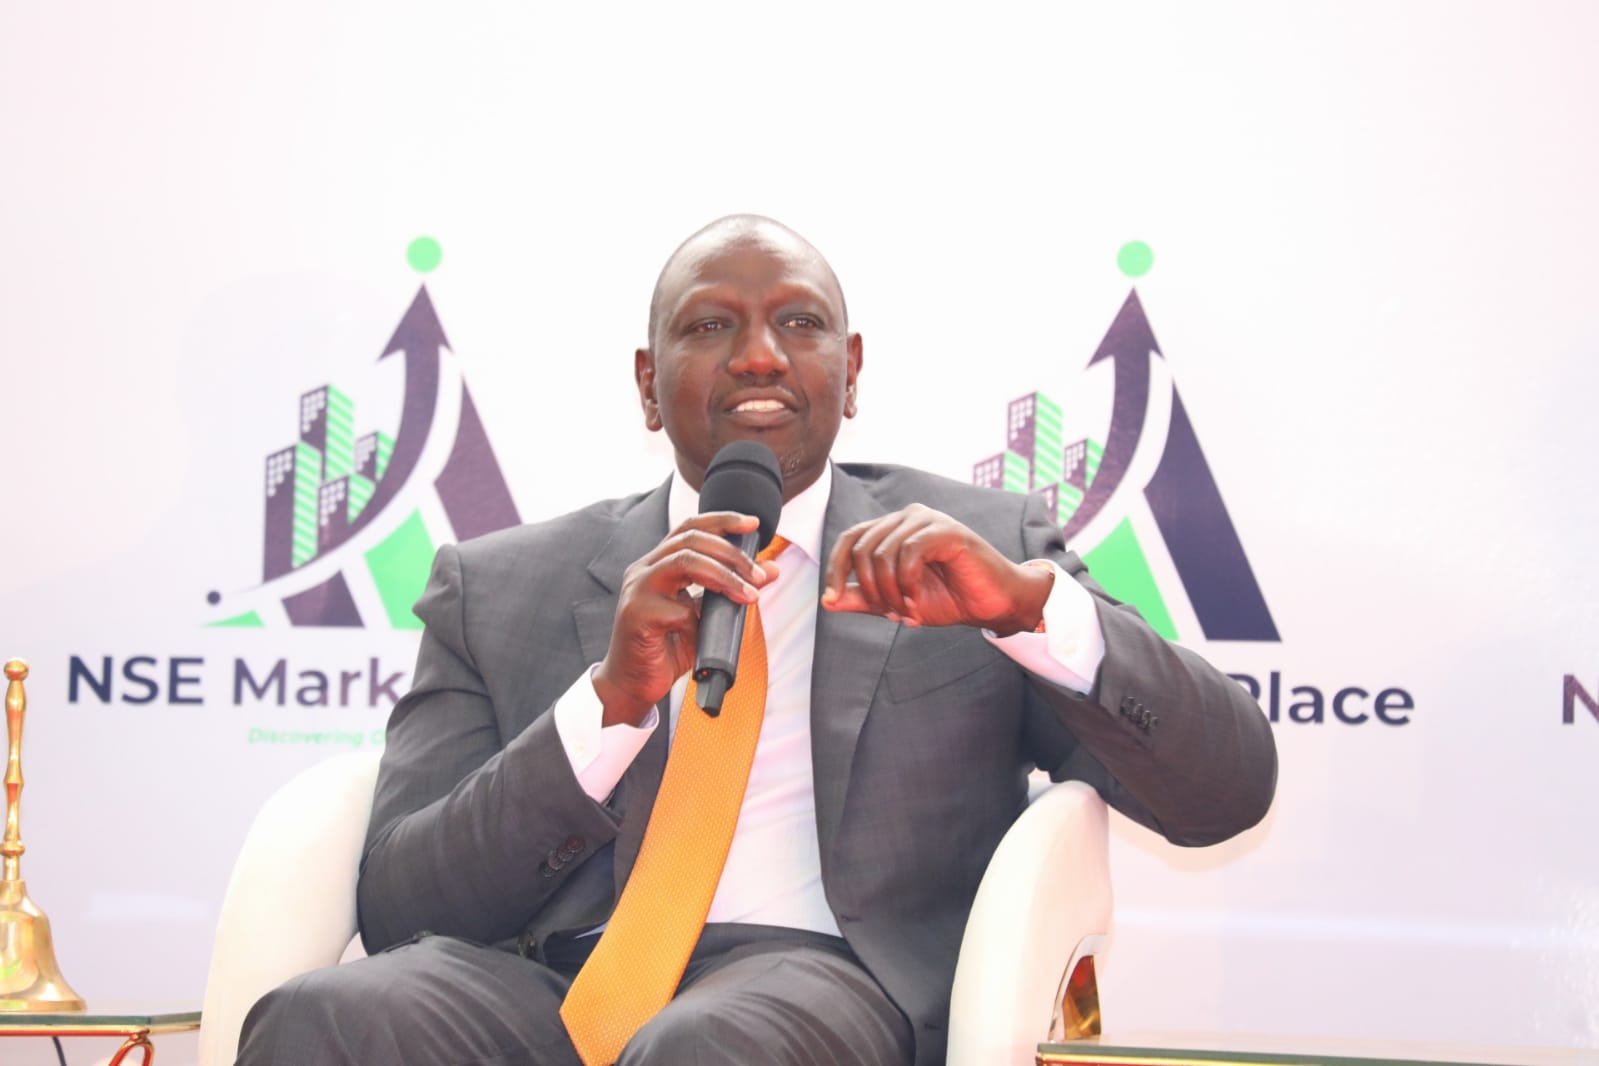 President William Ruto at the NSE launch.